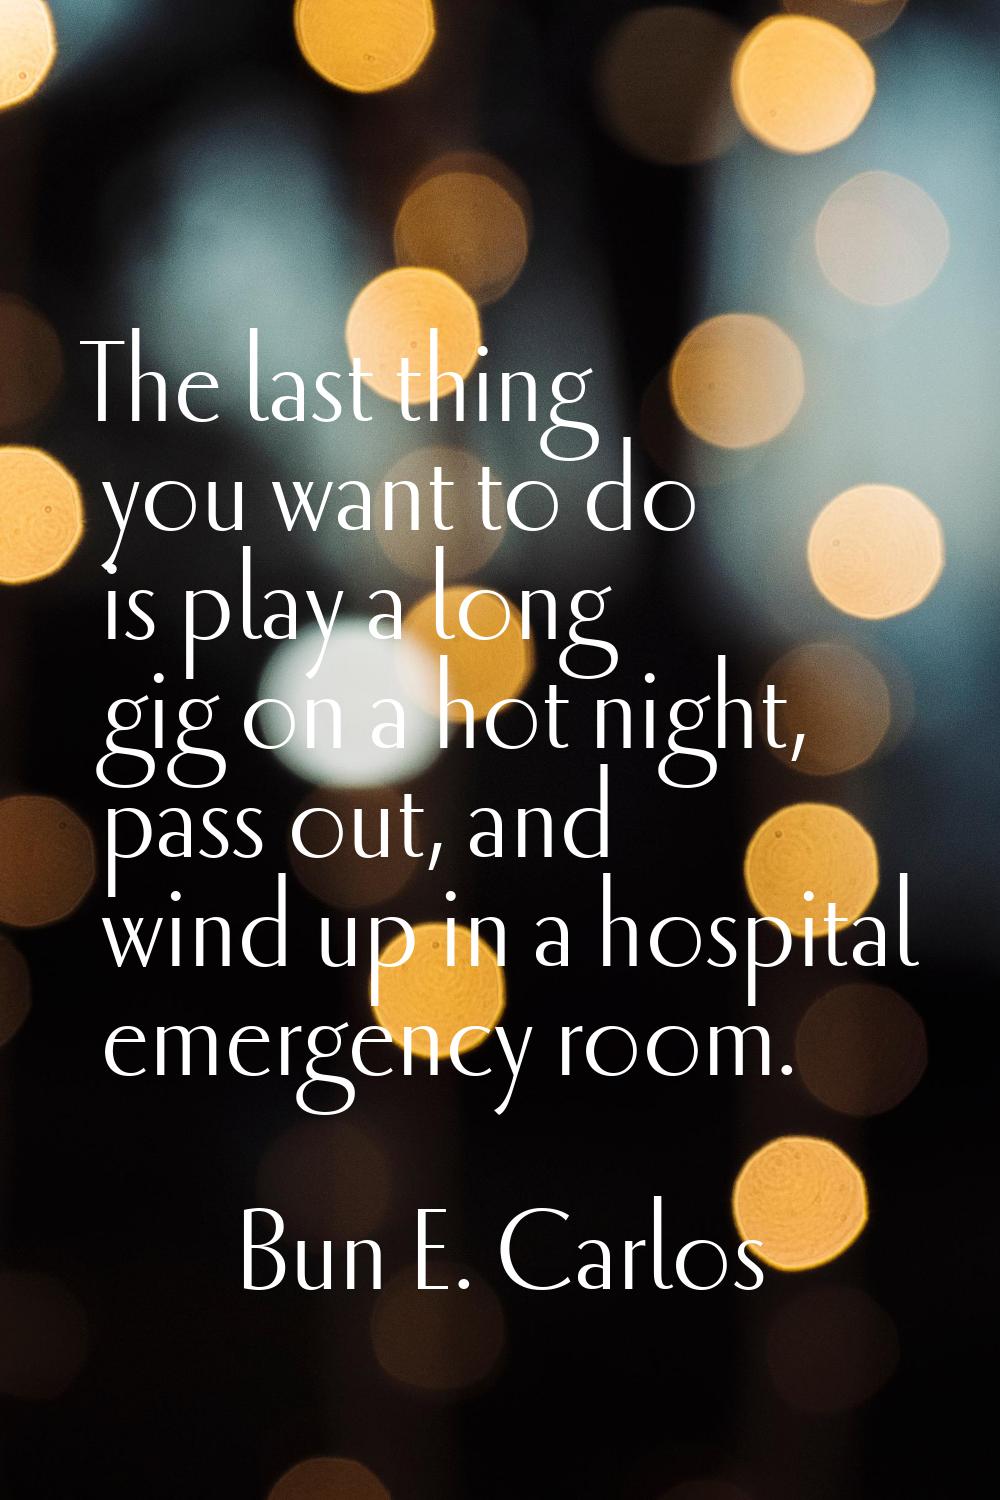 The last thing you want to do is play a long gig on a hot night, pass out, and wind up in a hospita